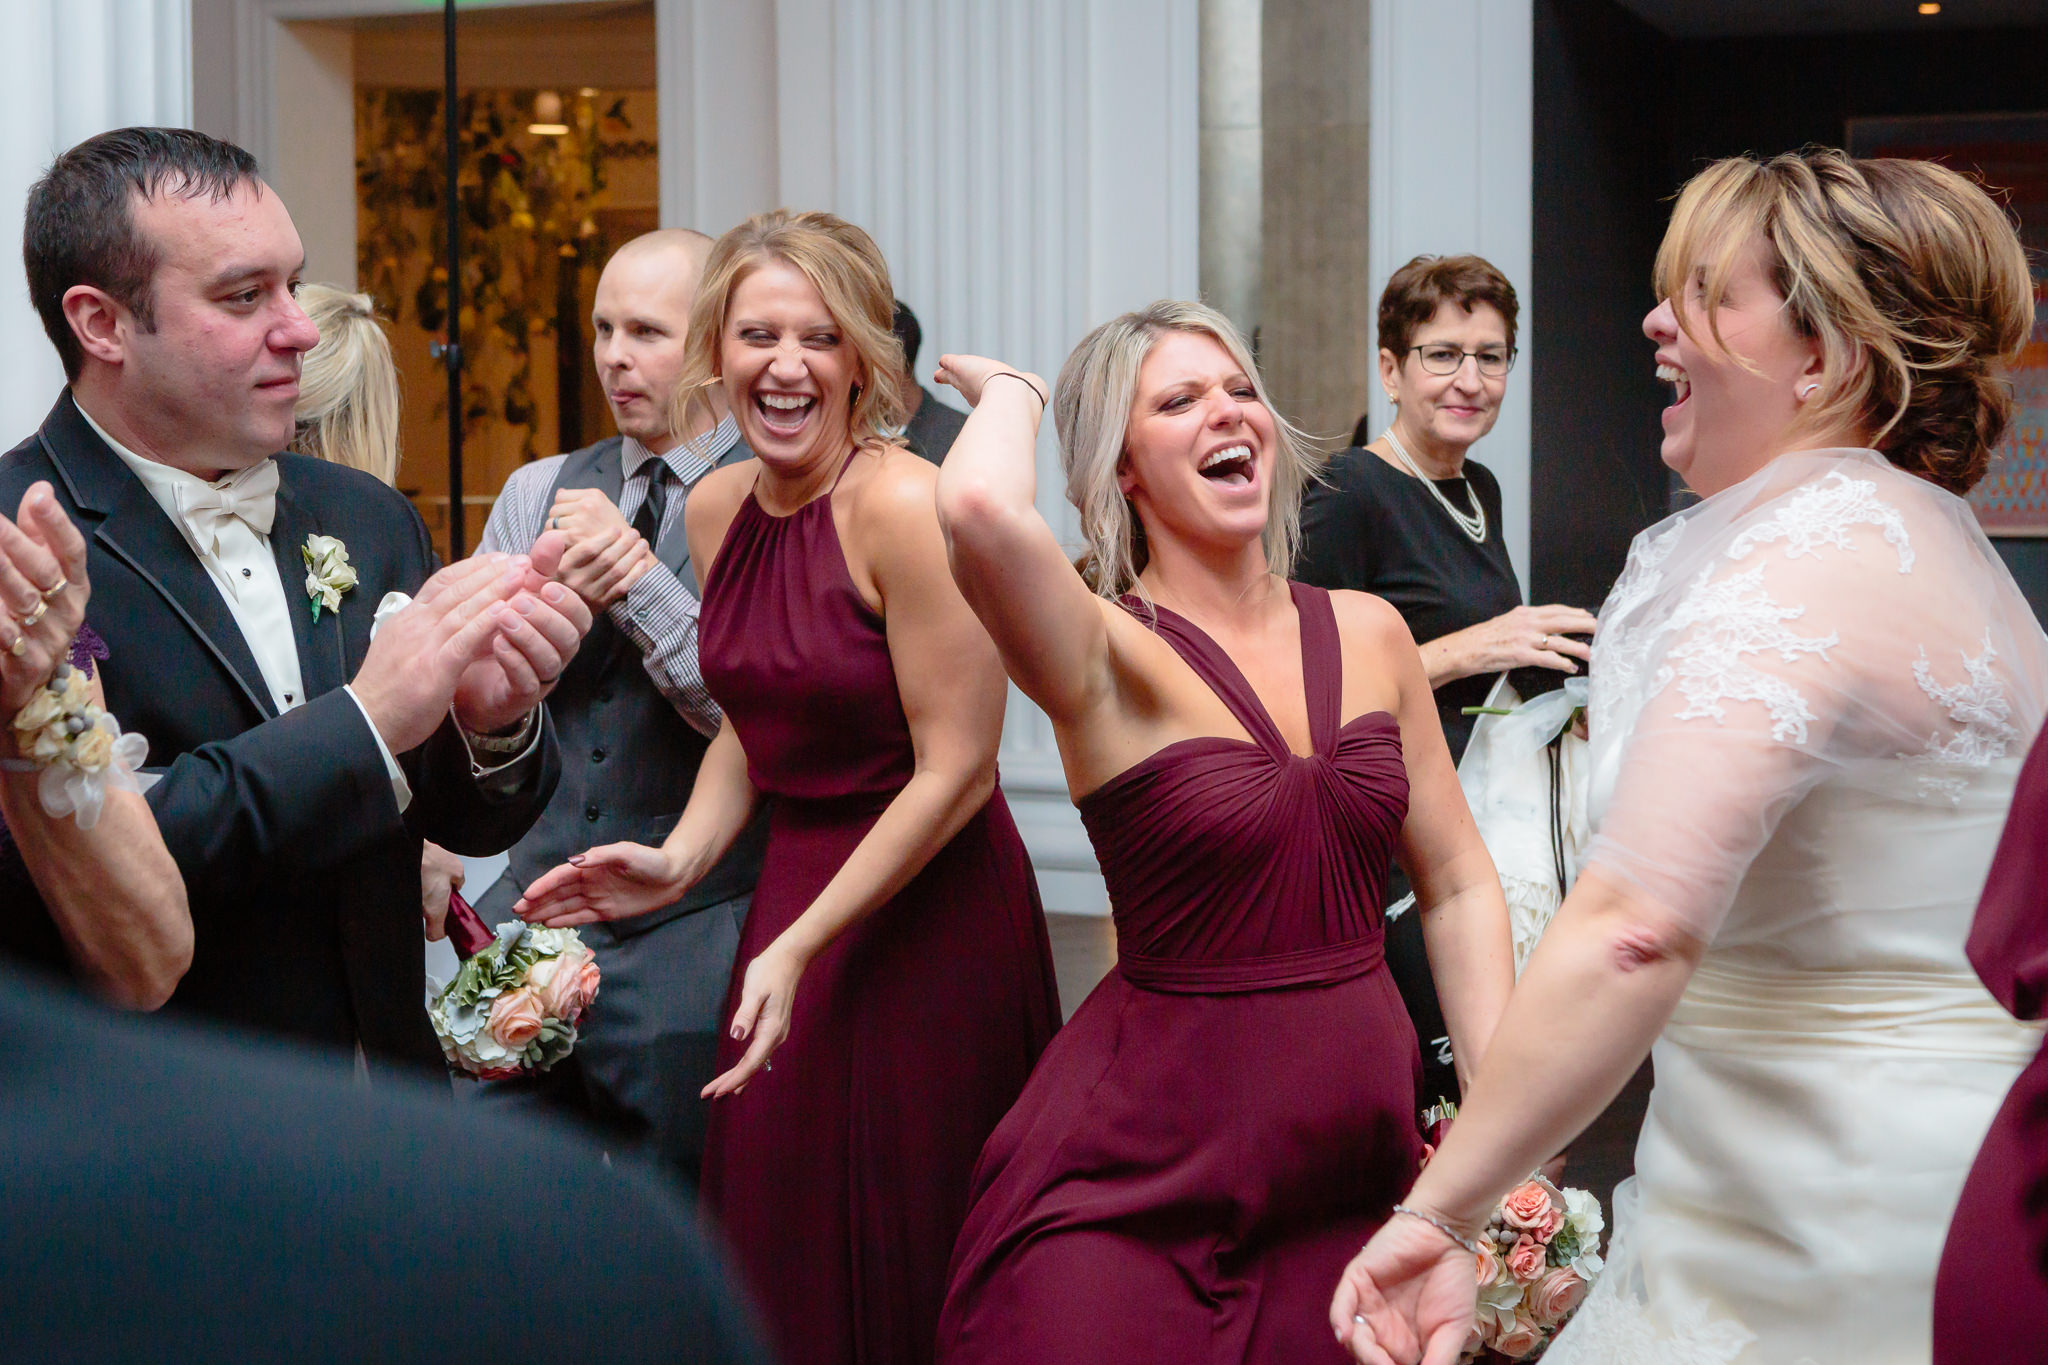 Bridesmaids dance with the bride & groom at a Pittsburgh Hotel Monaco wedding reception